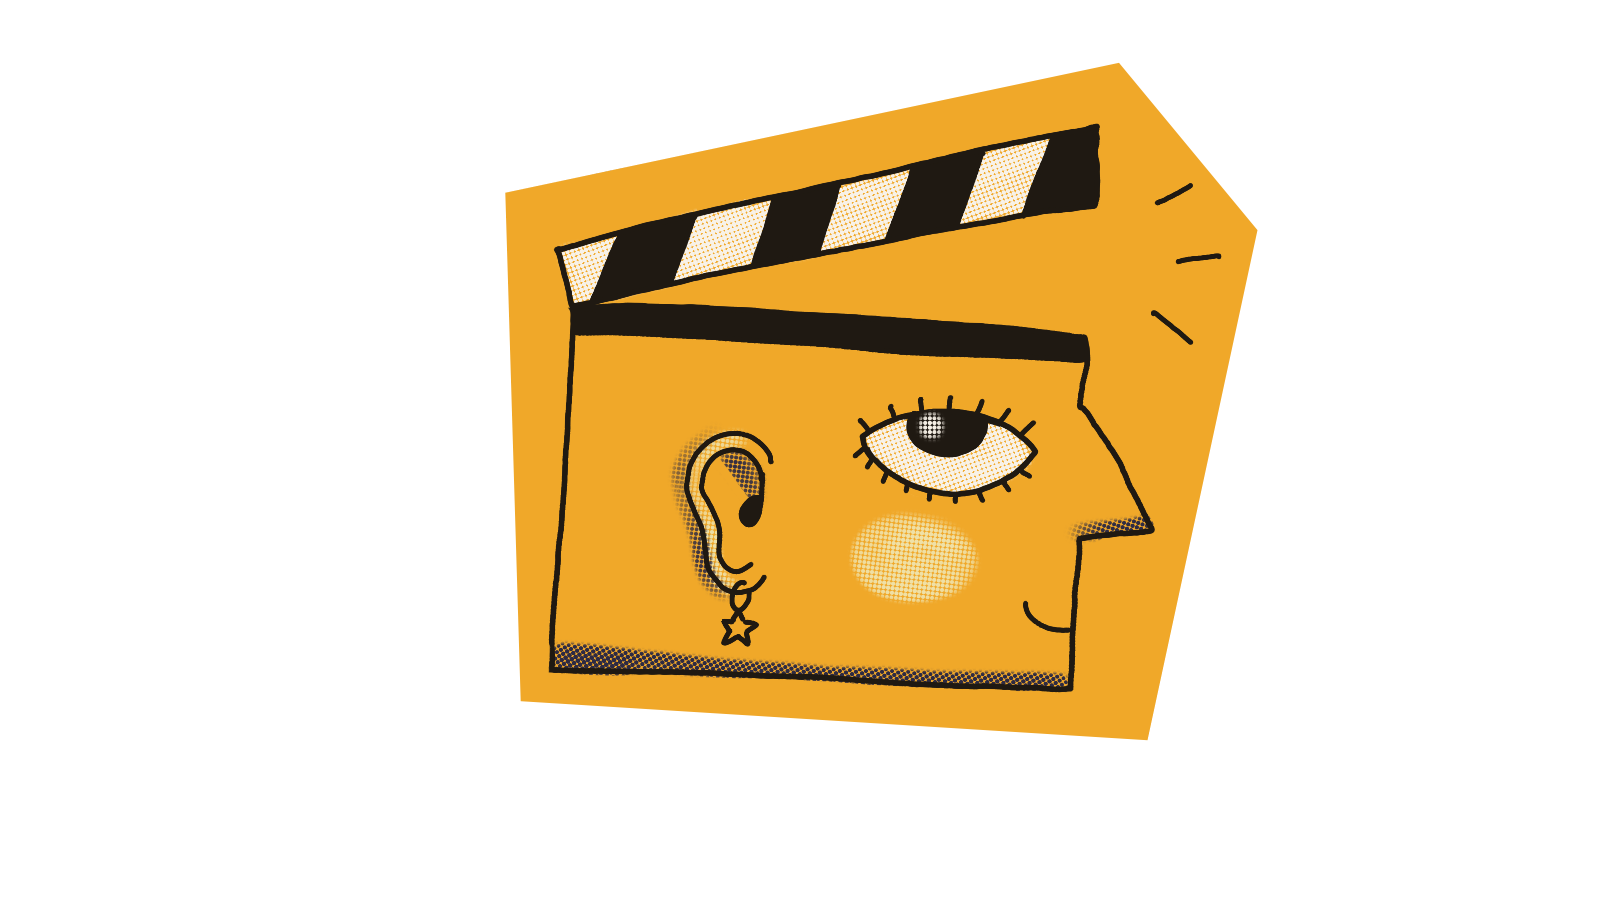 Image is of a unique looking clapperboard. This demonstrates the film and video production services that Melbourne based content agency and video production company Monster & Bear can provide to clients